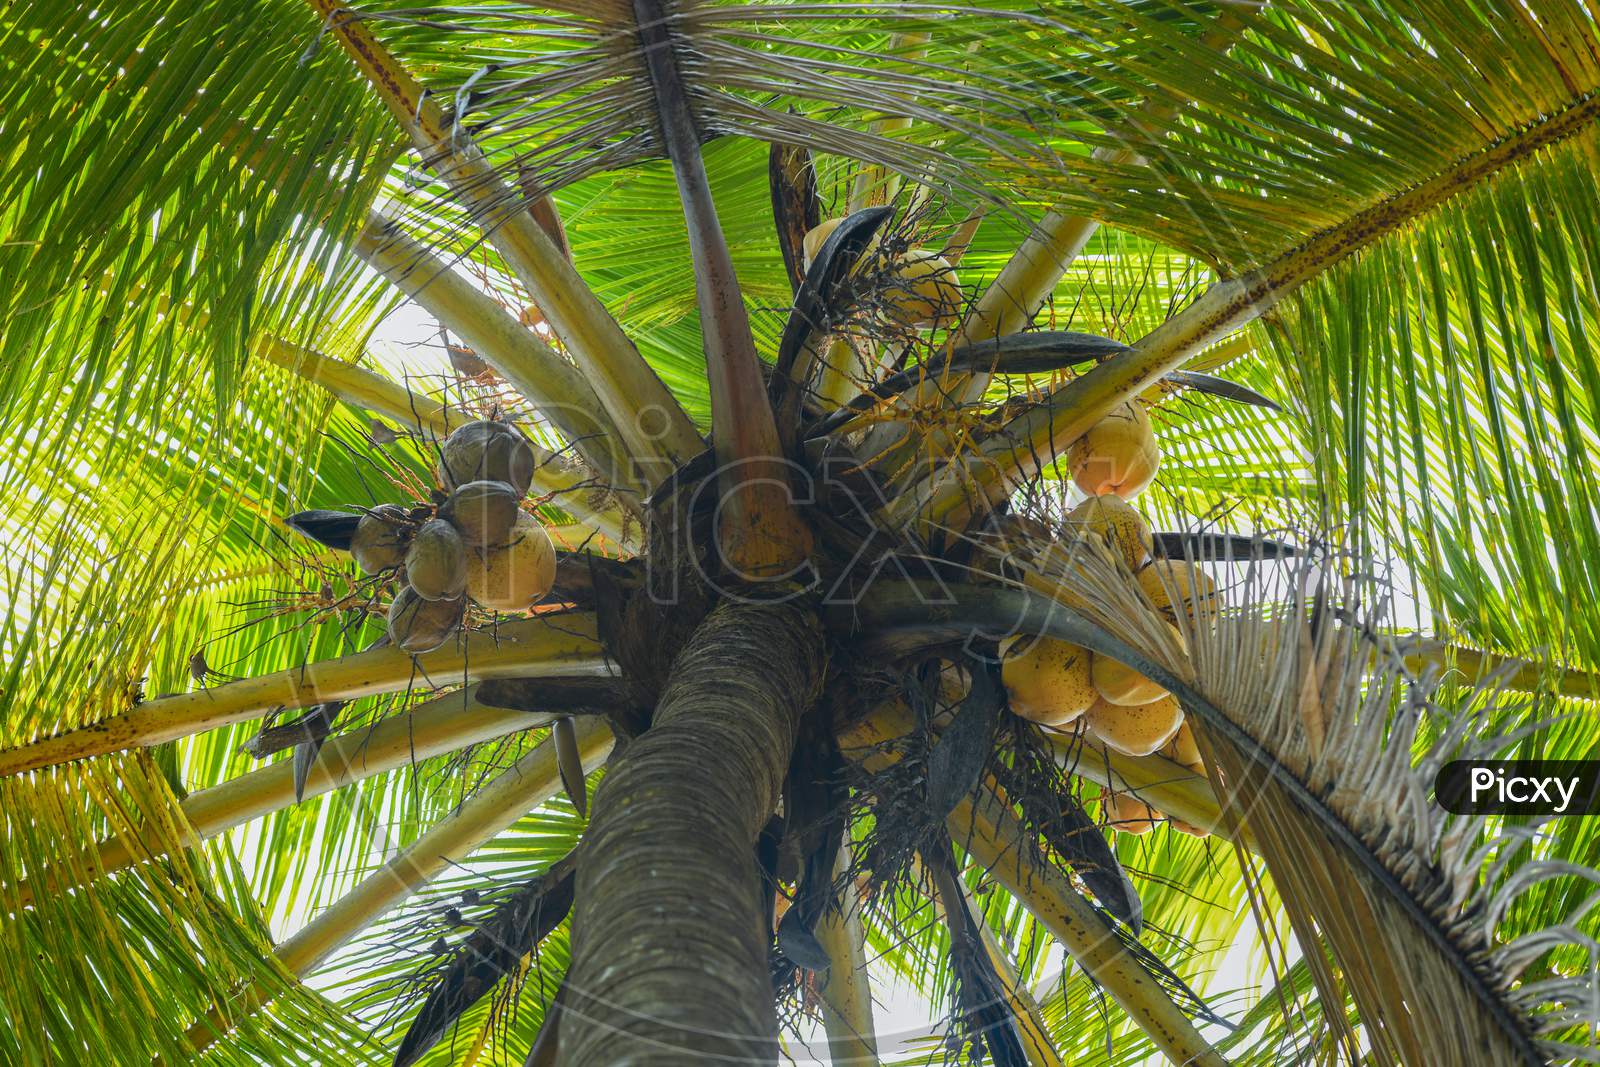 Bunch of coconuts in the tree